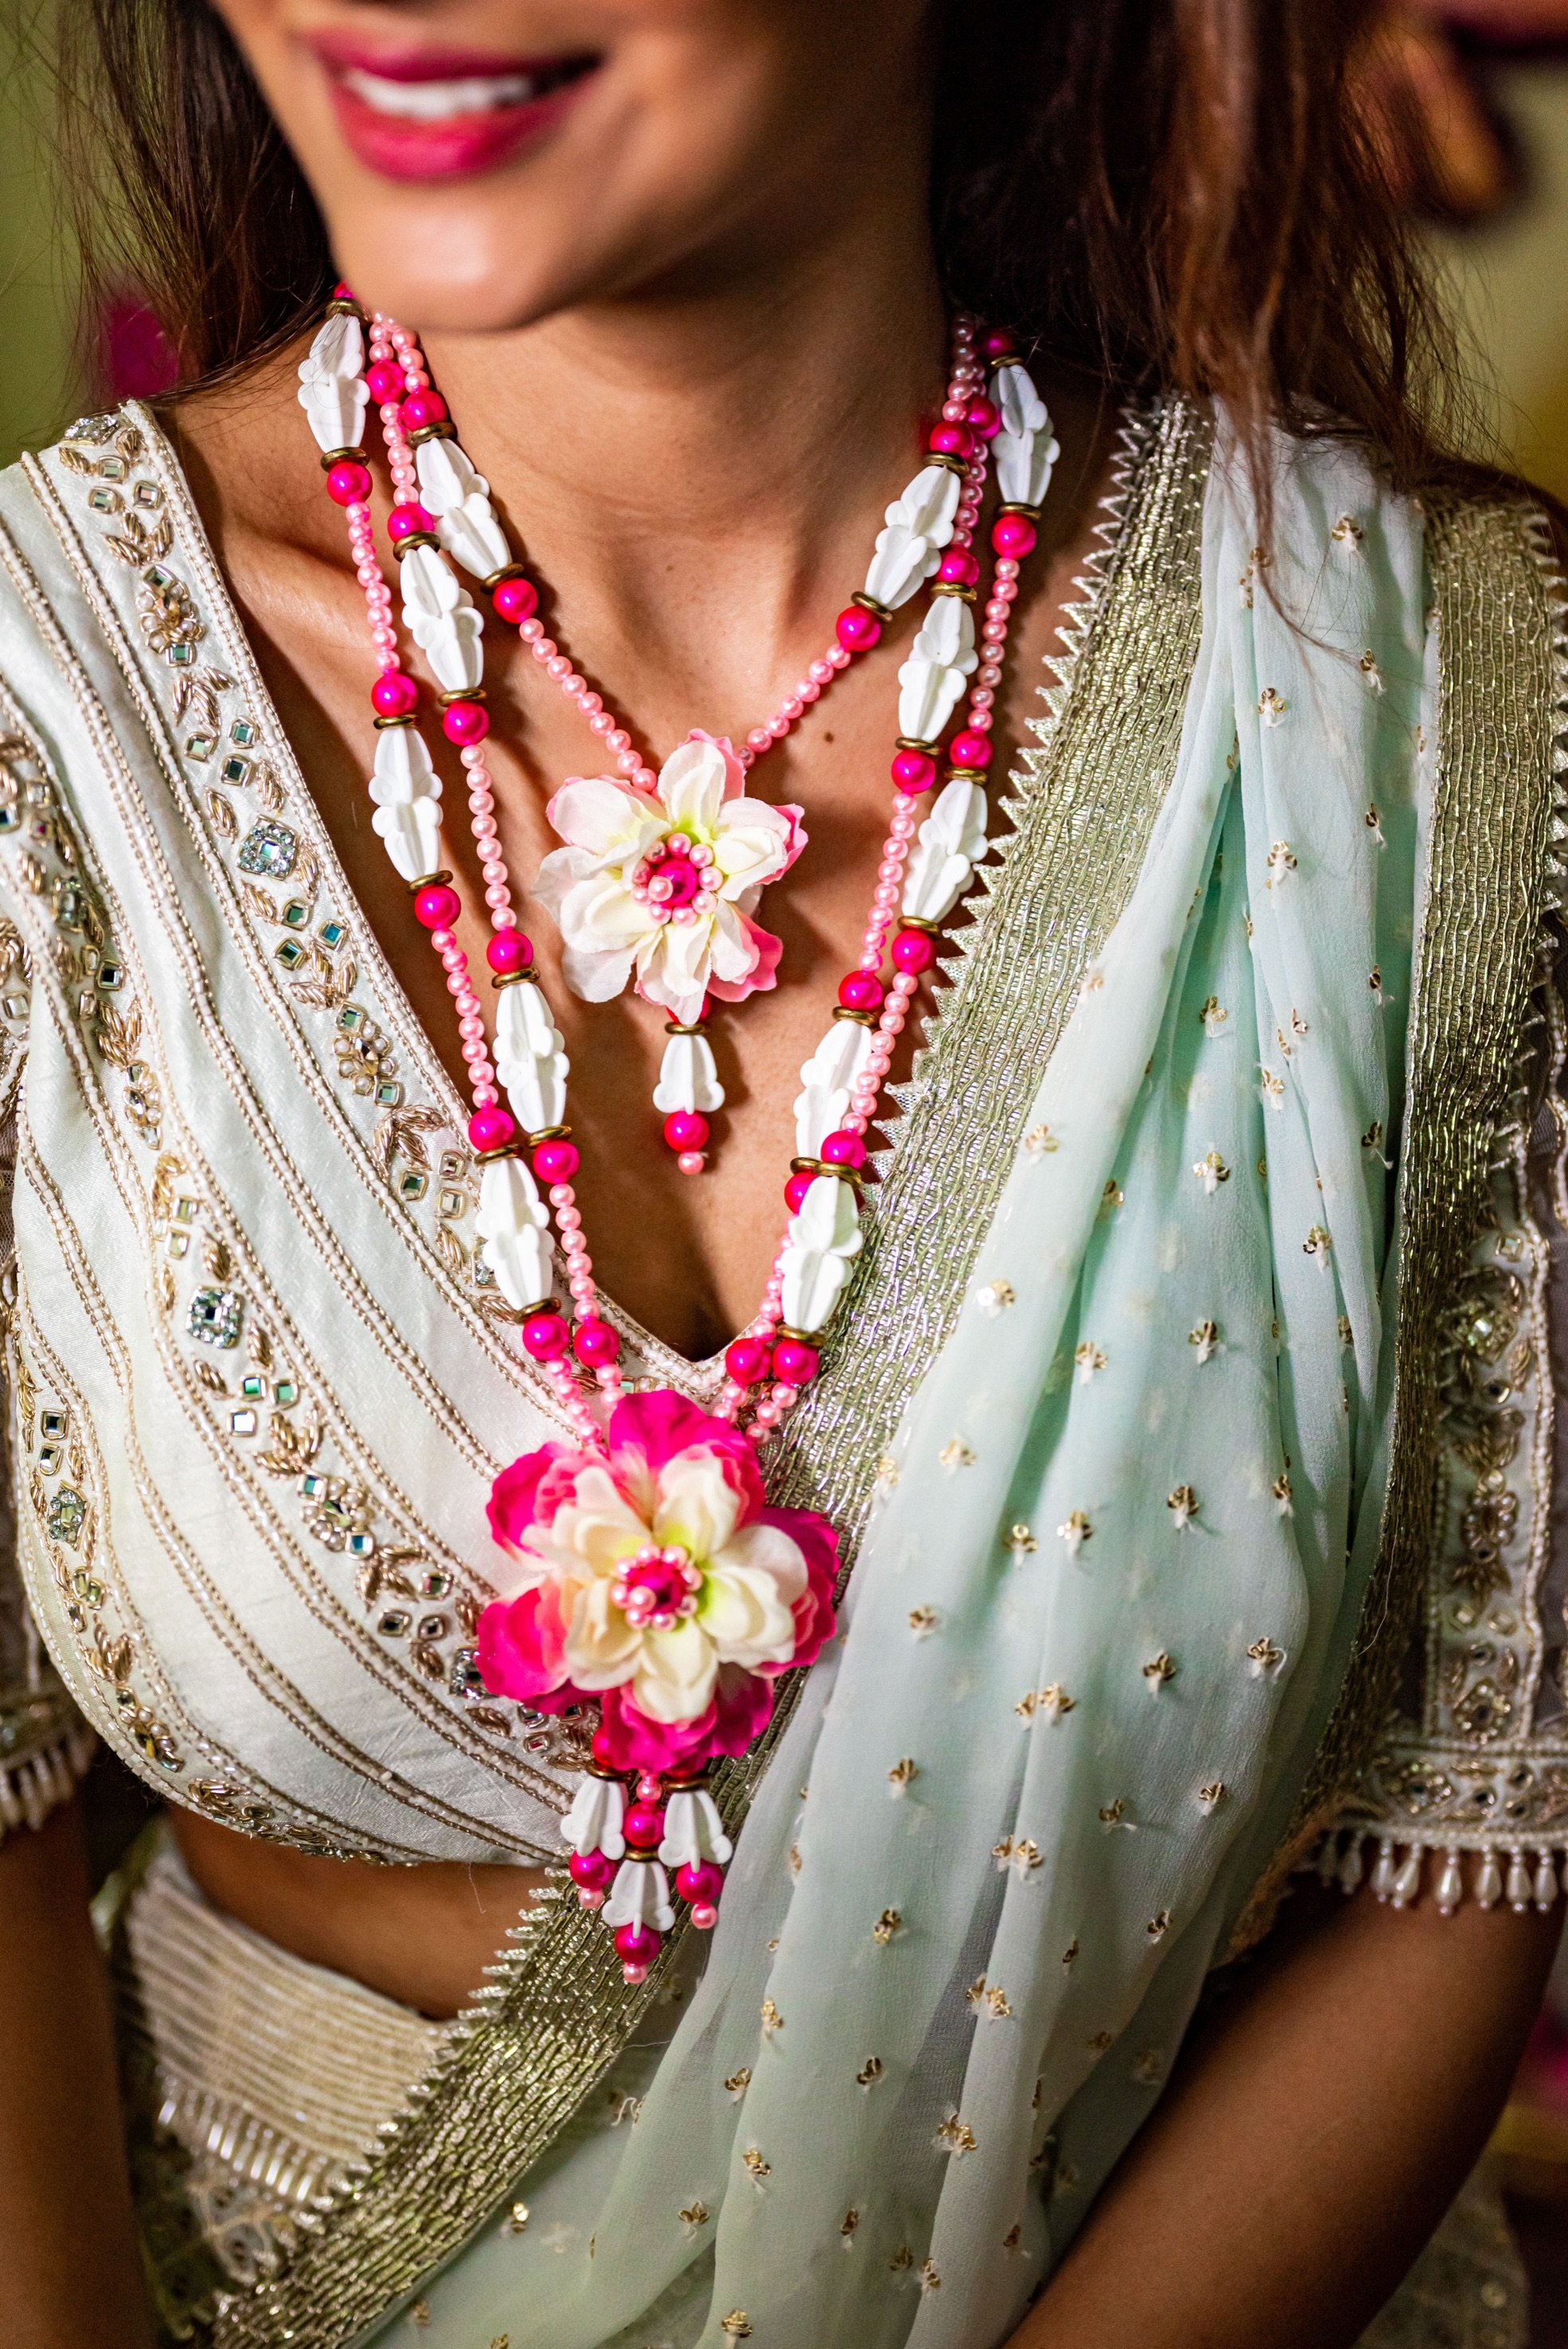 Floral art | Pink & White Floral Pearl Work Necklace For Women undefined